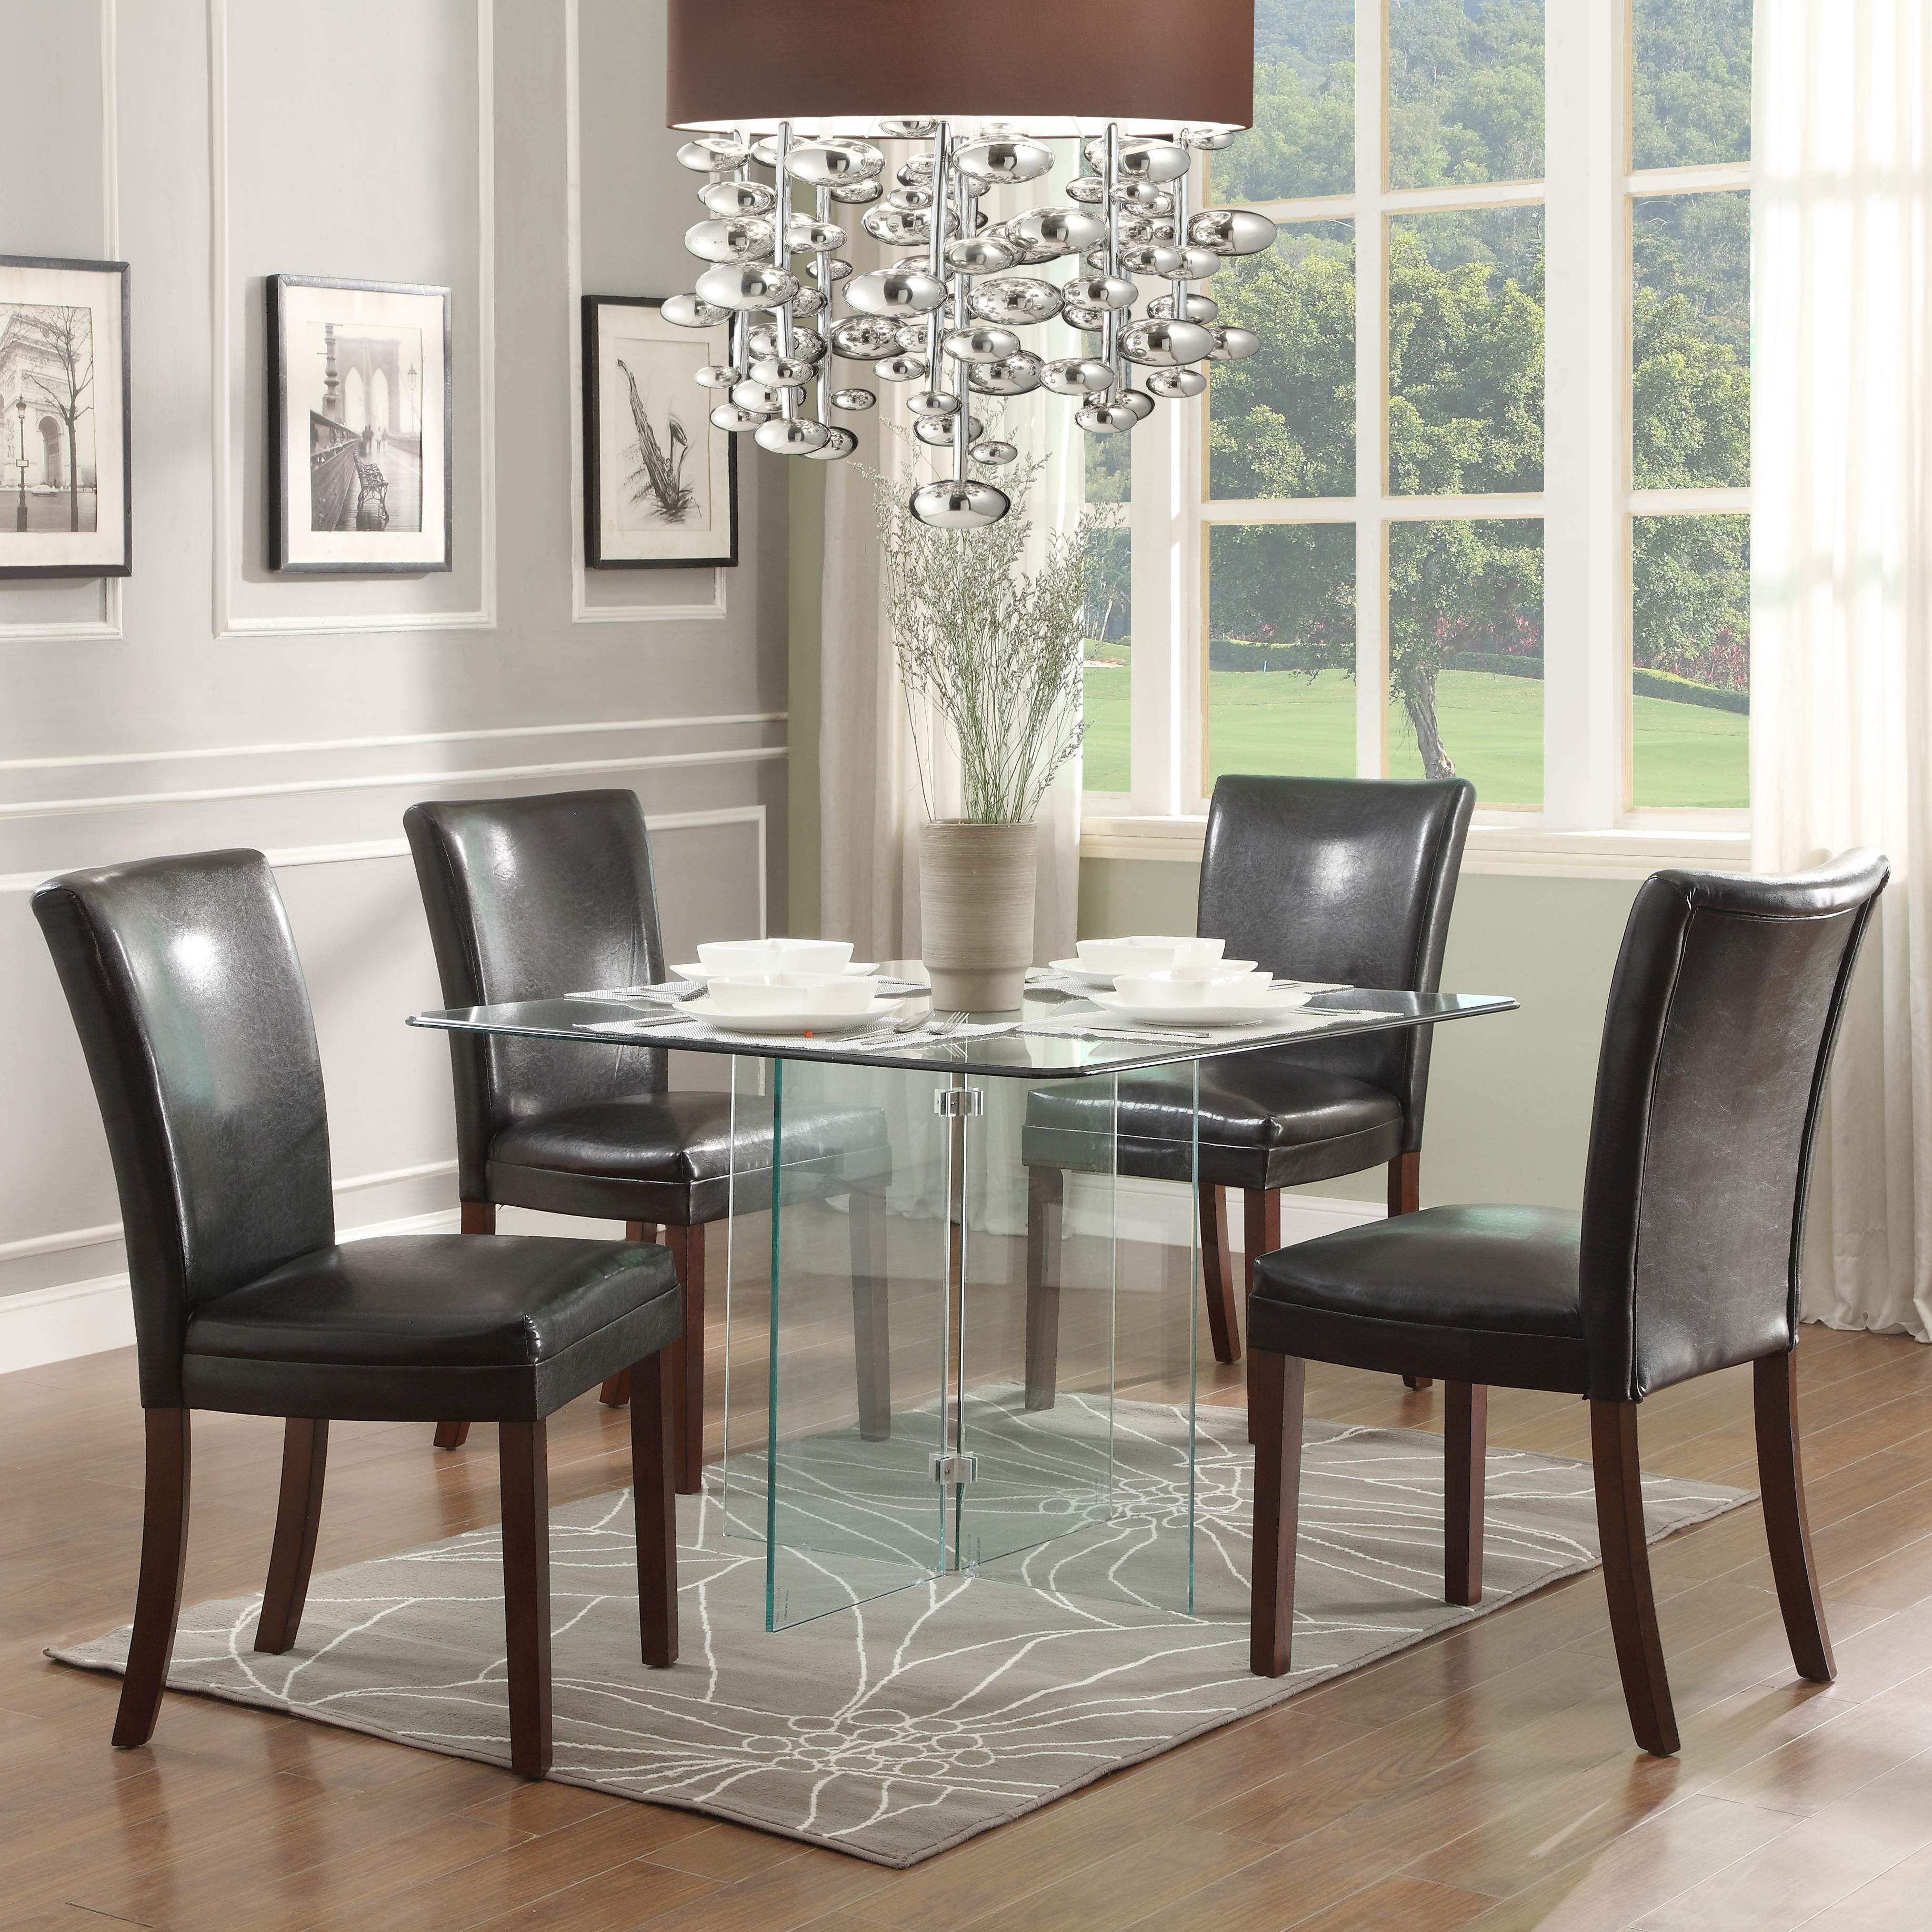 Square Glass Top Dining Tables Designs, Small Glass Dining Room Table